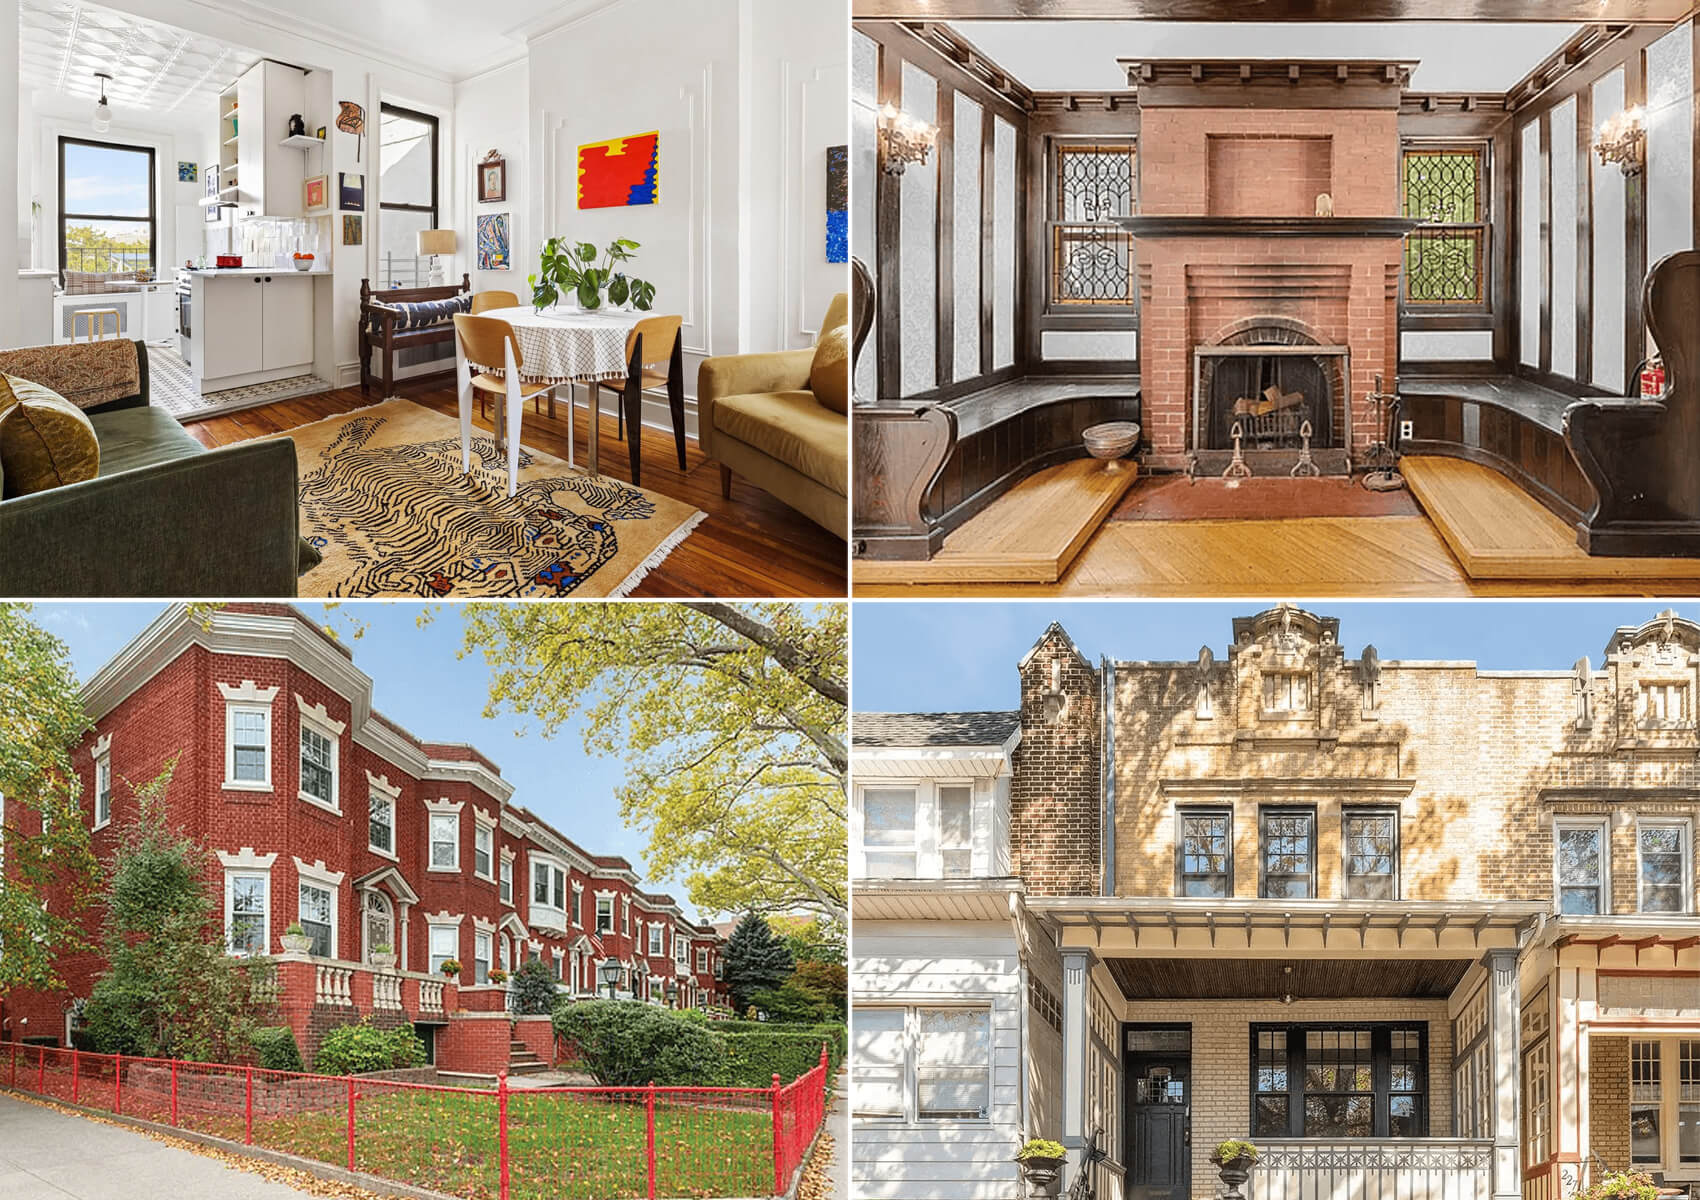 brooklyn listings - images of interiors and exteriors of houses on the market